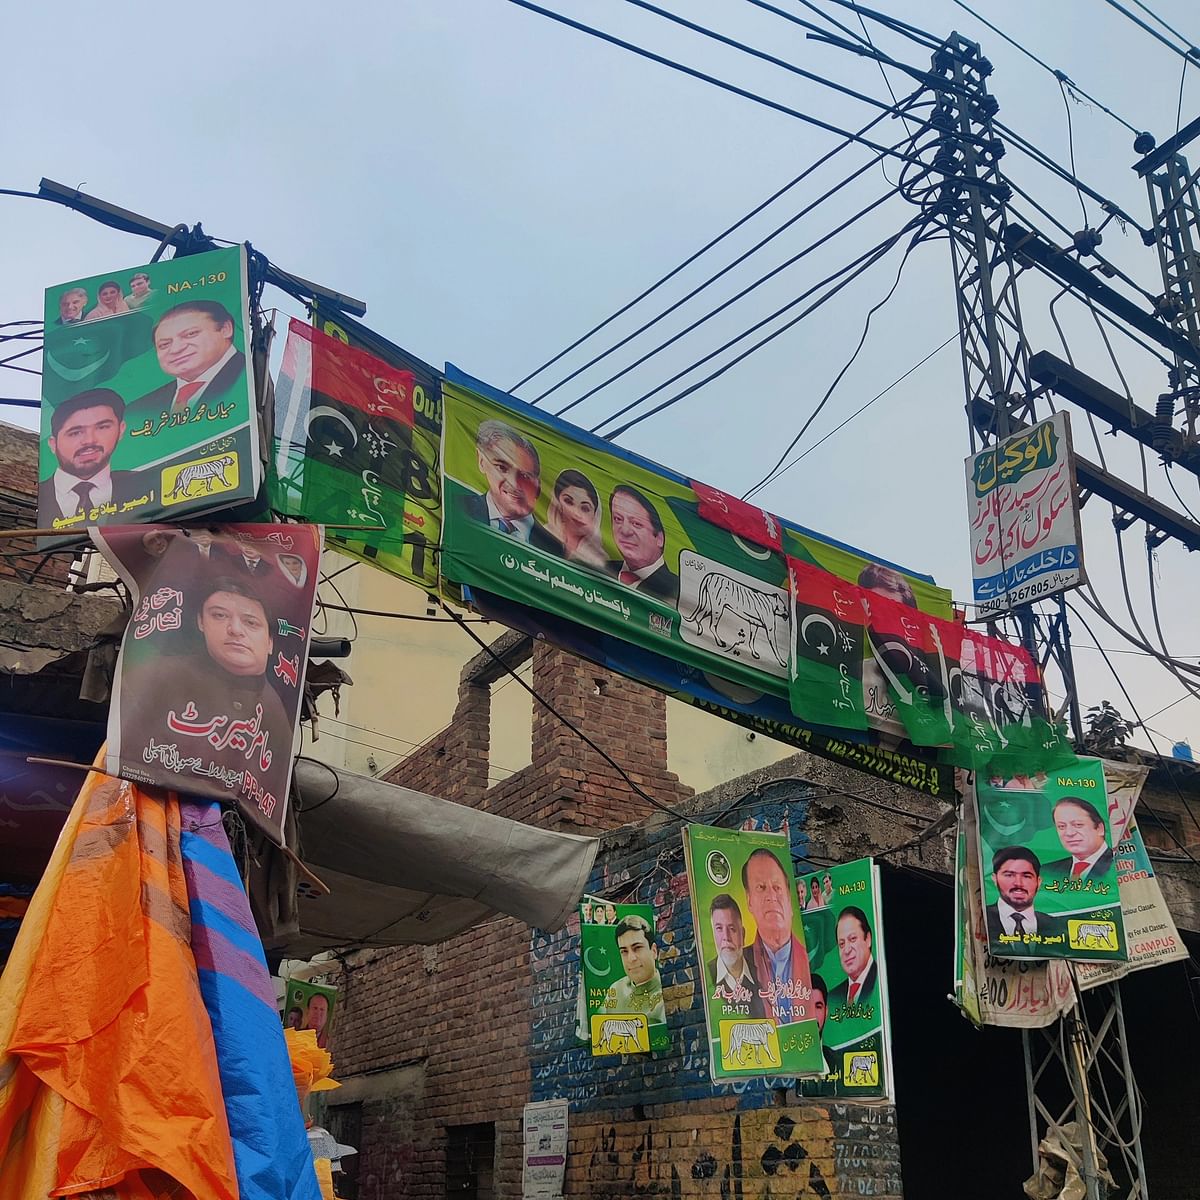 "I have personally seen PTI posters being taken down by the municipal authorities just last week," says Imran Hamid.